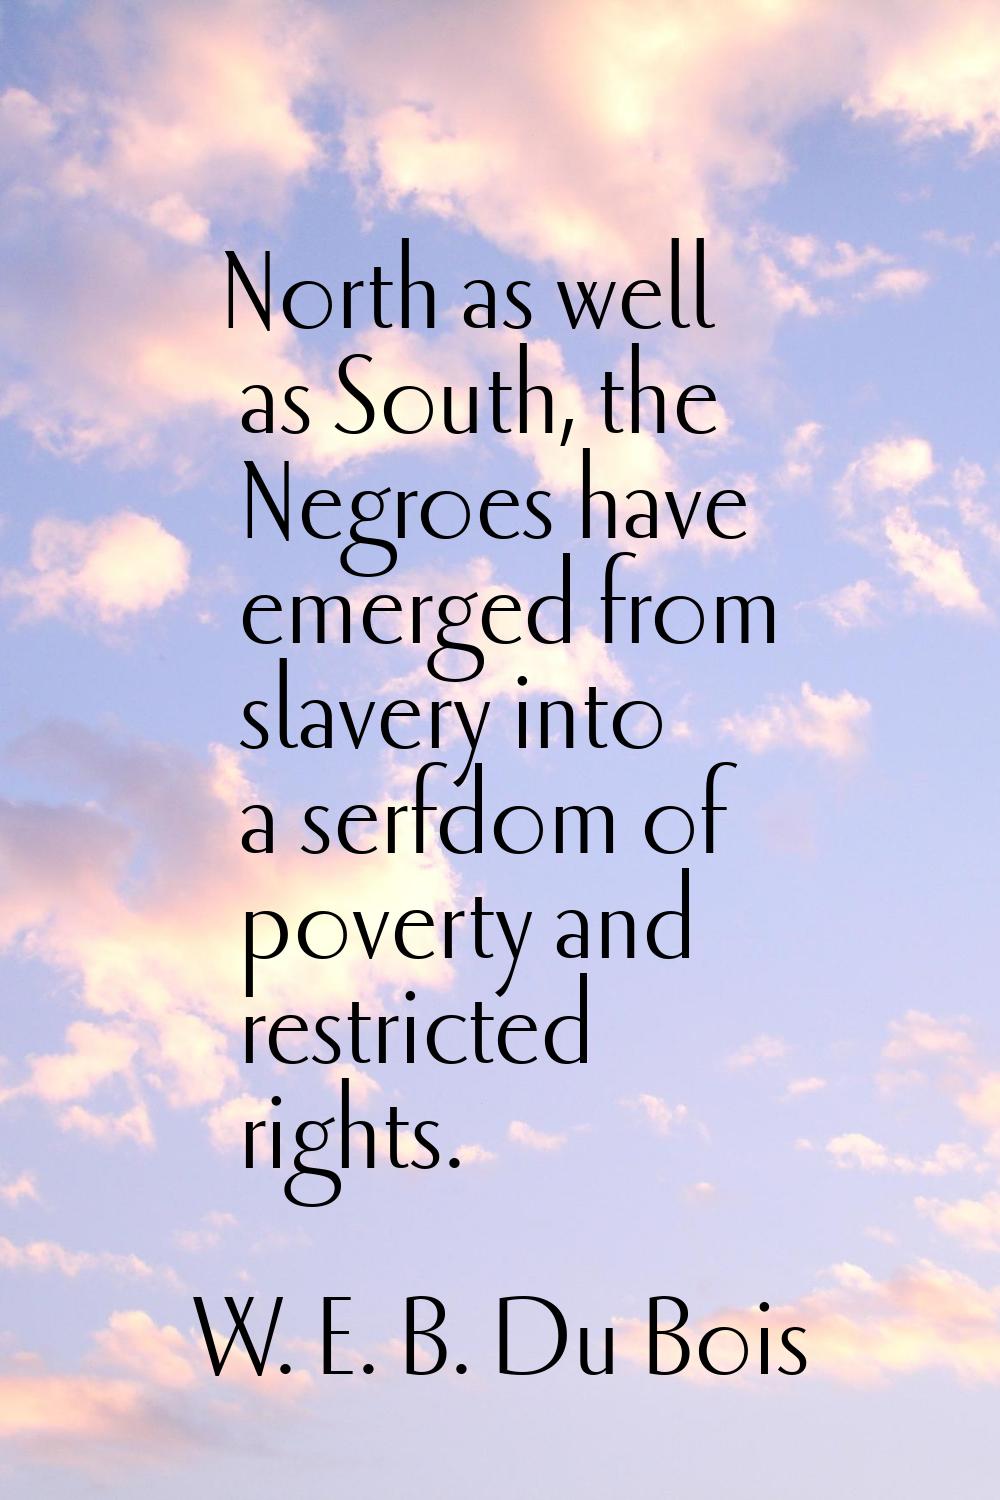 North as well as South, the Negroes have emerged from slavery into a serfdom of poverty and restric